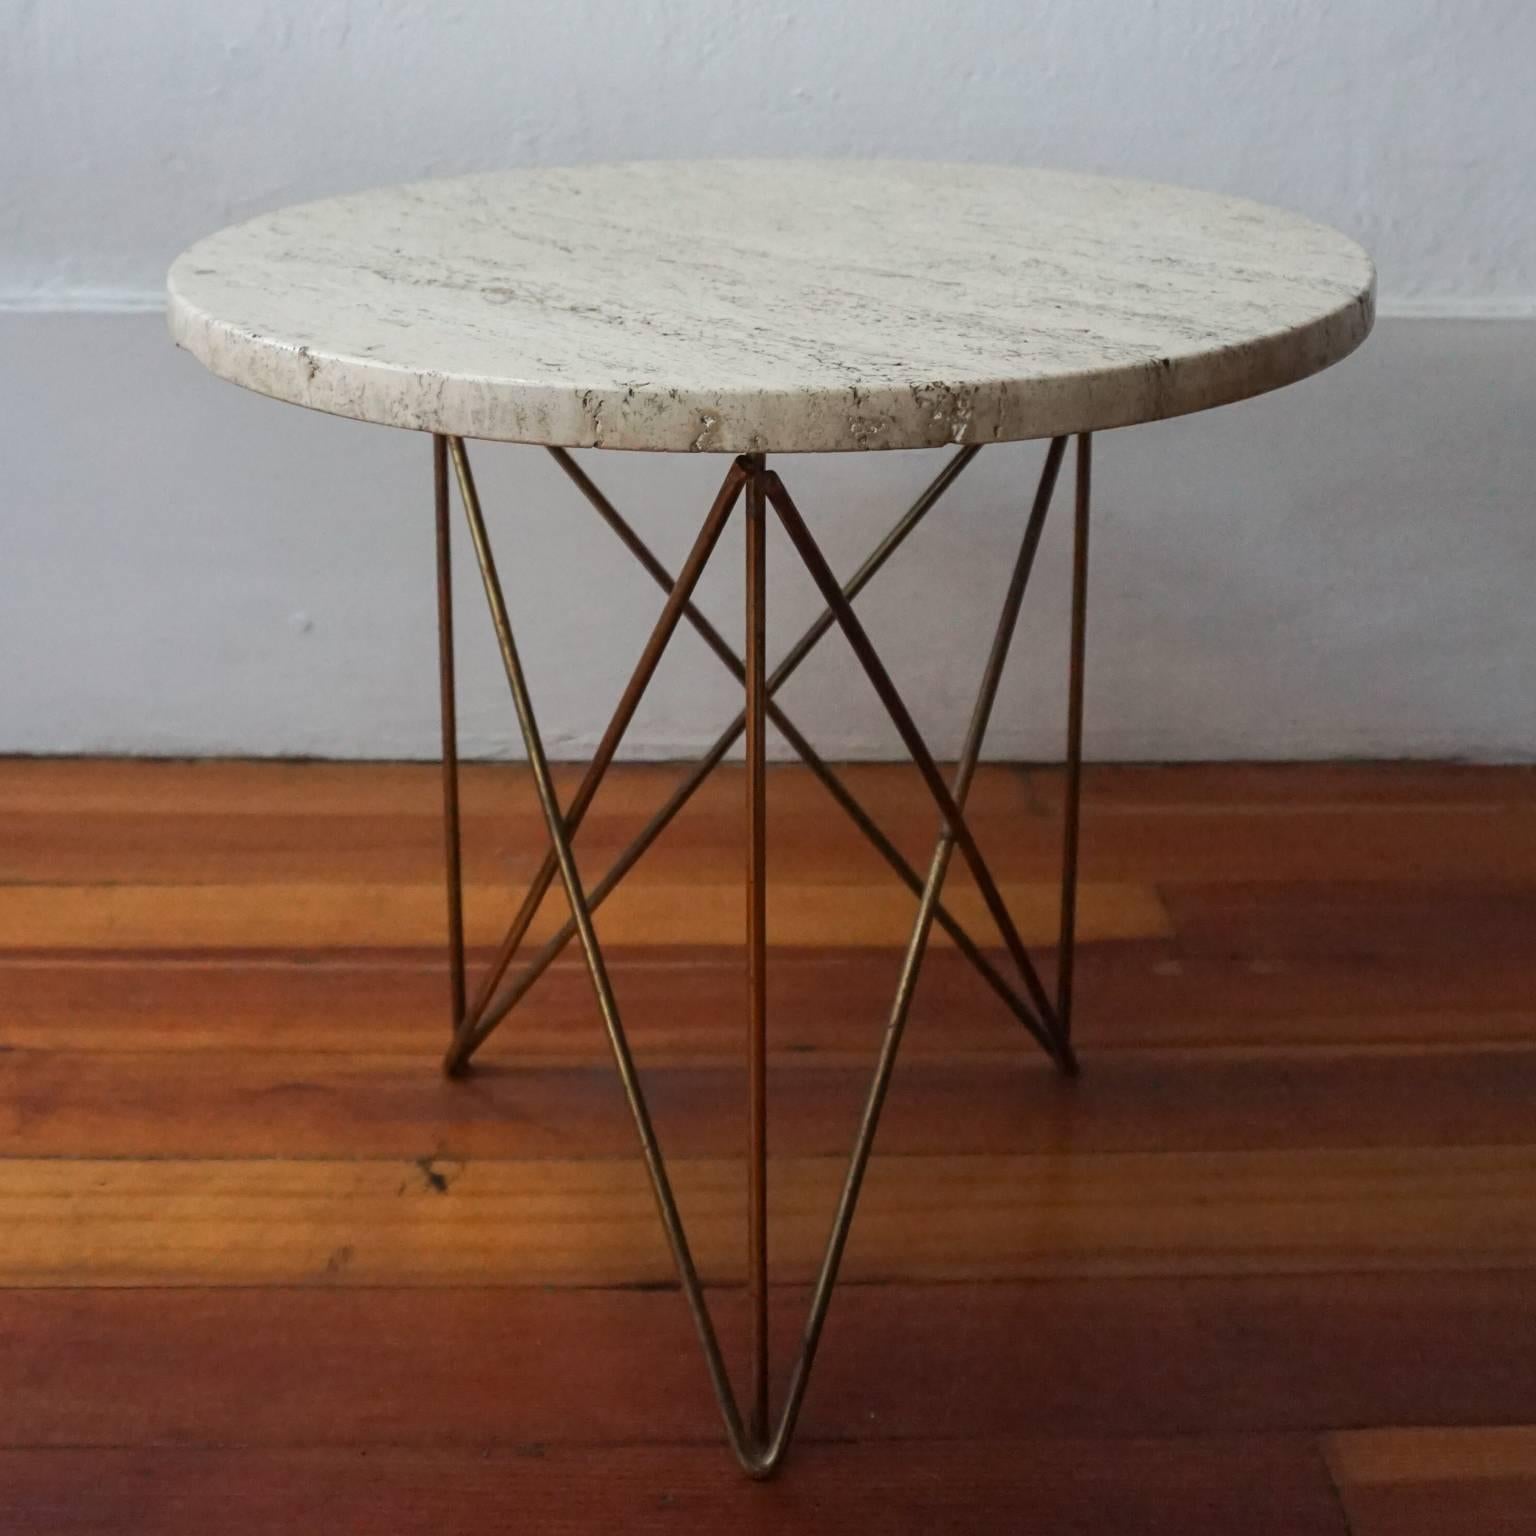 Criss-cross tripod base with terrazzo top side table by Martin Perfit for Rene Brancusi Inc, 1950s.